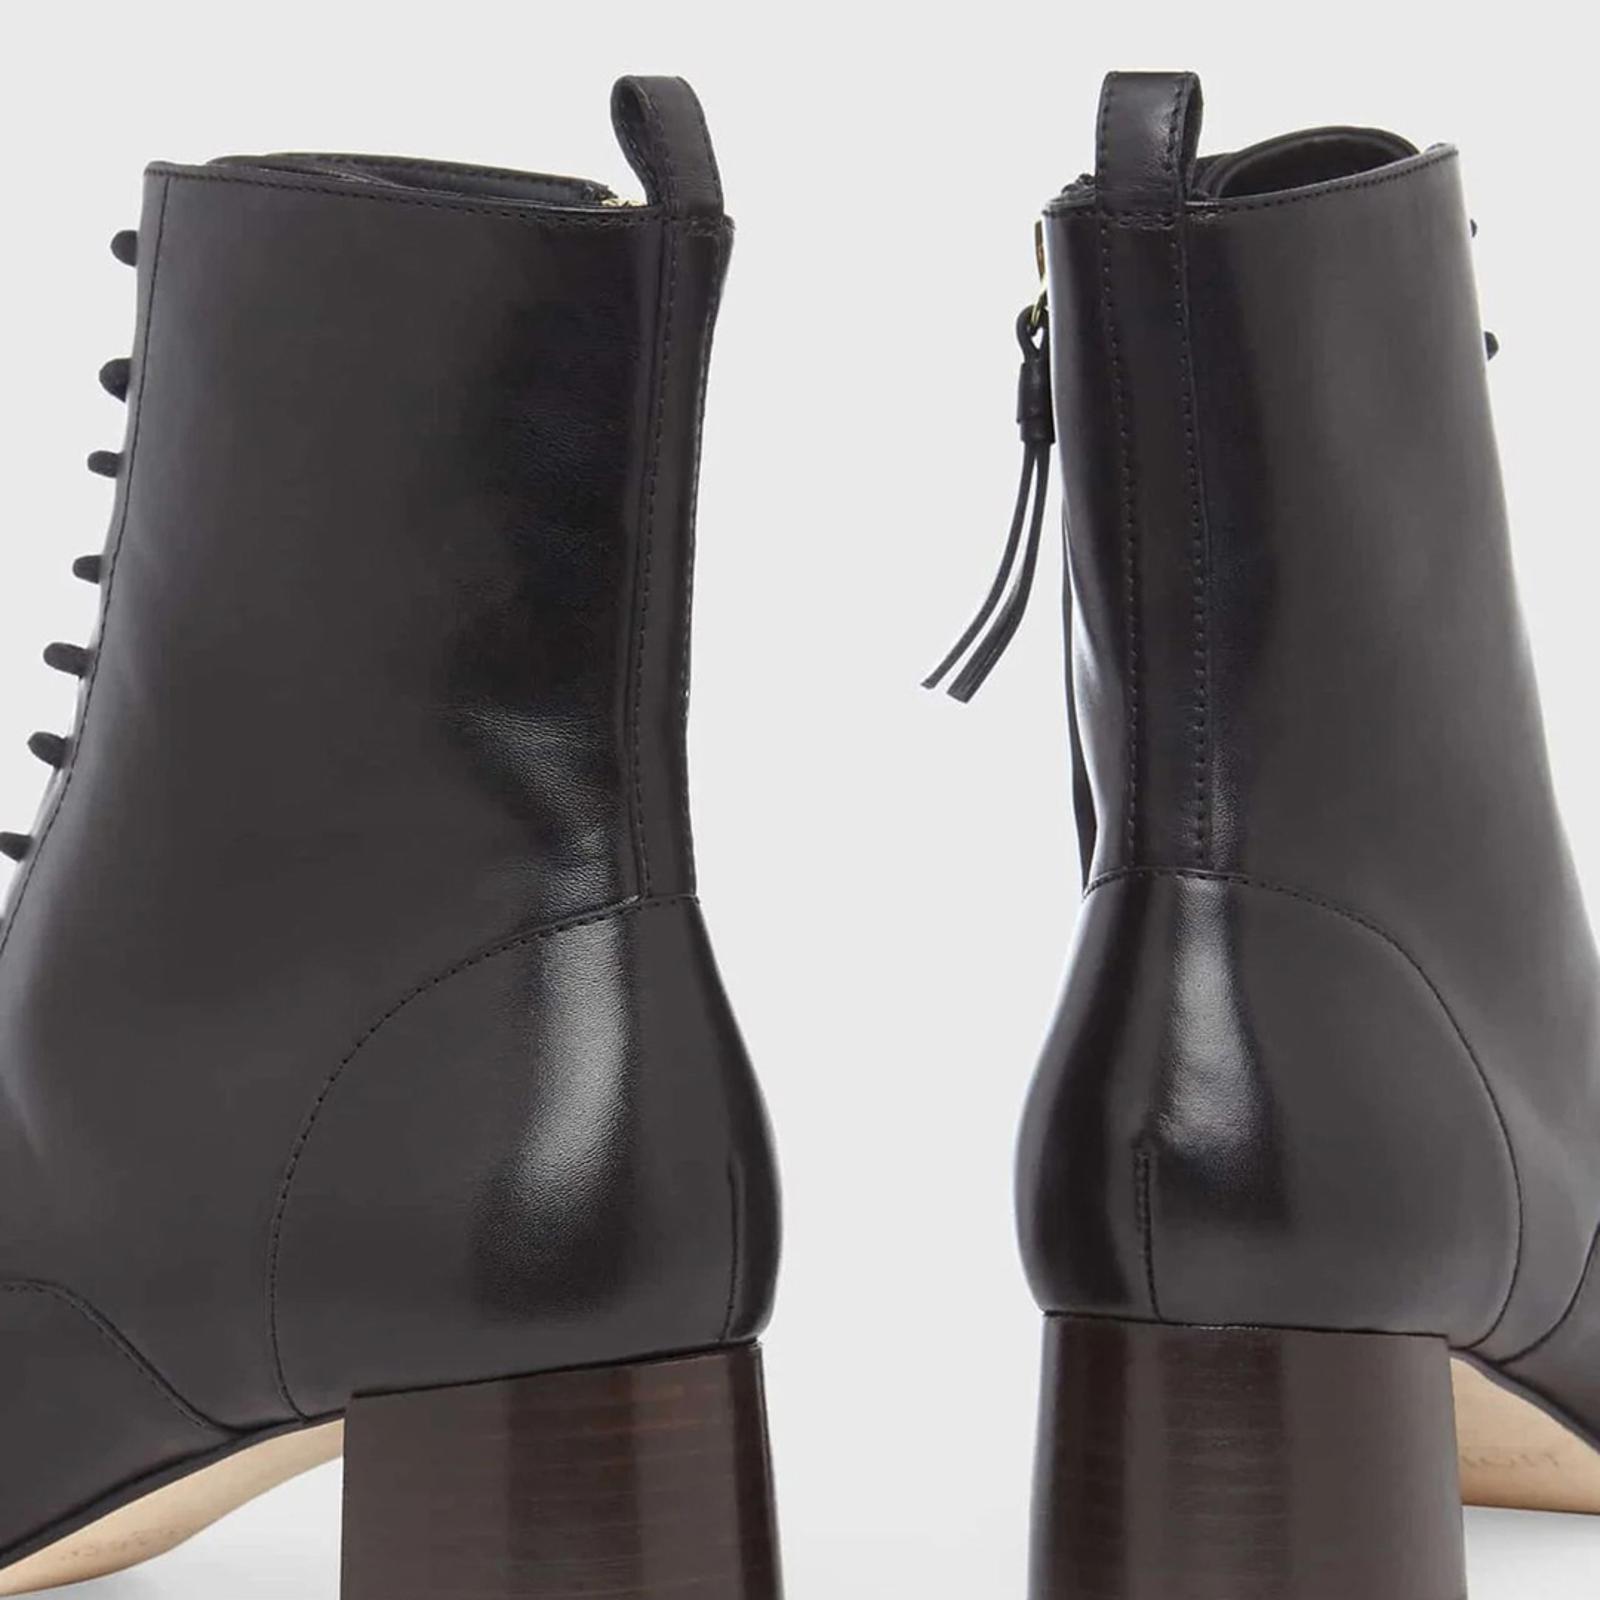 Black Issy Lace Up Leather Boots - BrandAlley